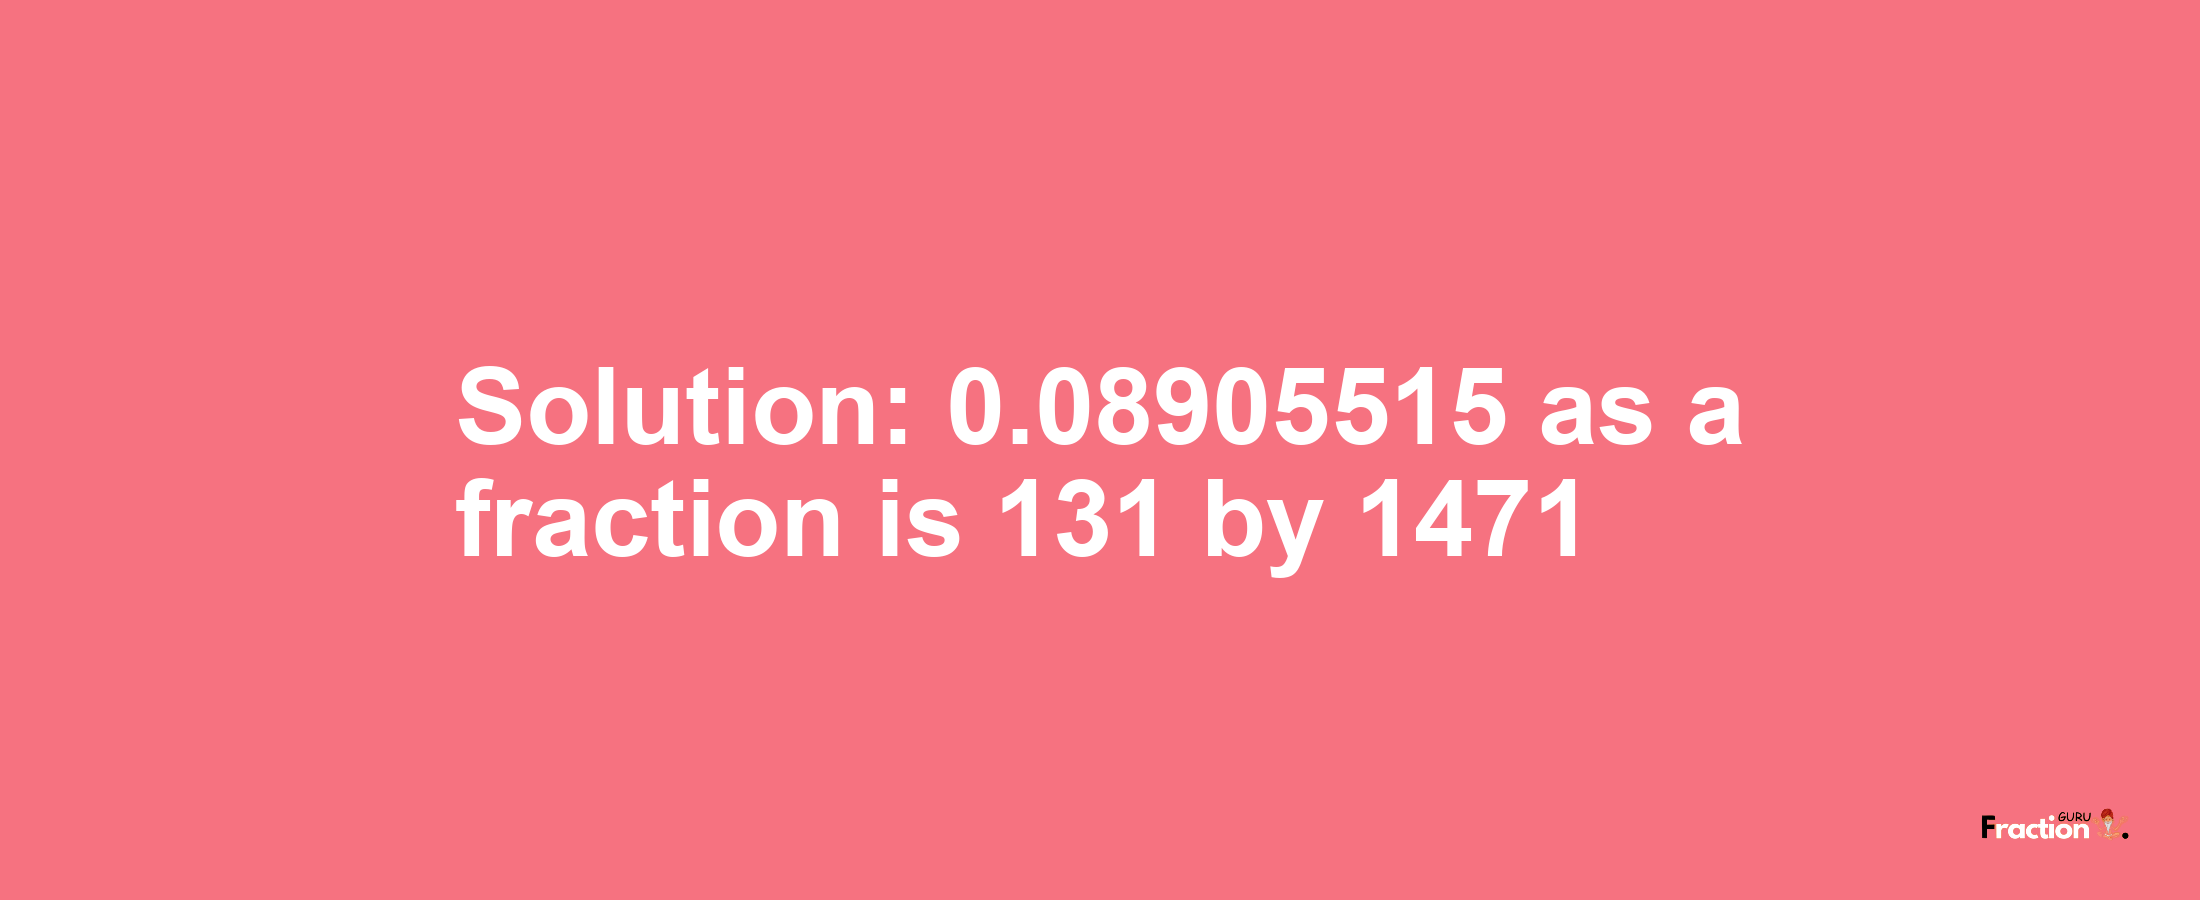 Solution:0.08905515 as a fraction is 131/1471